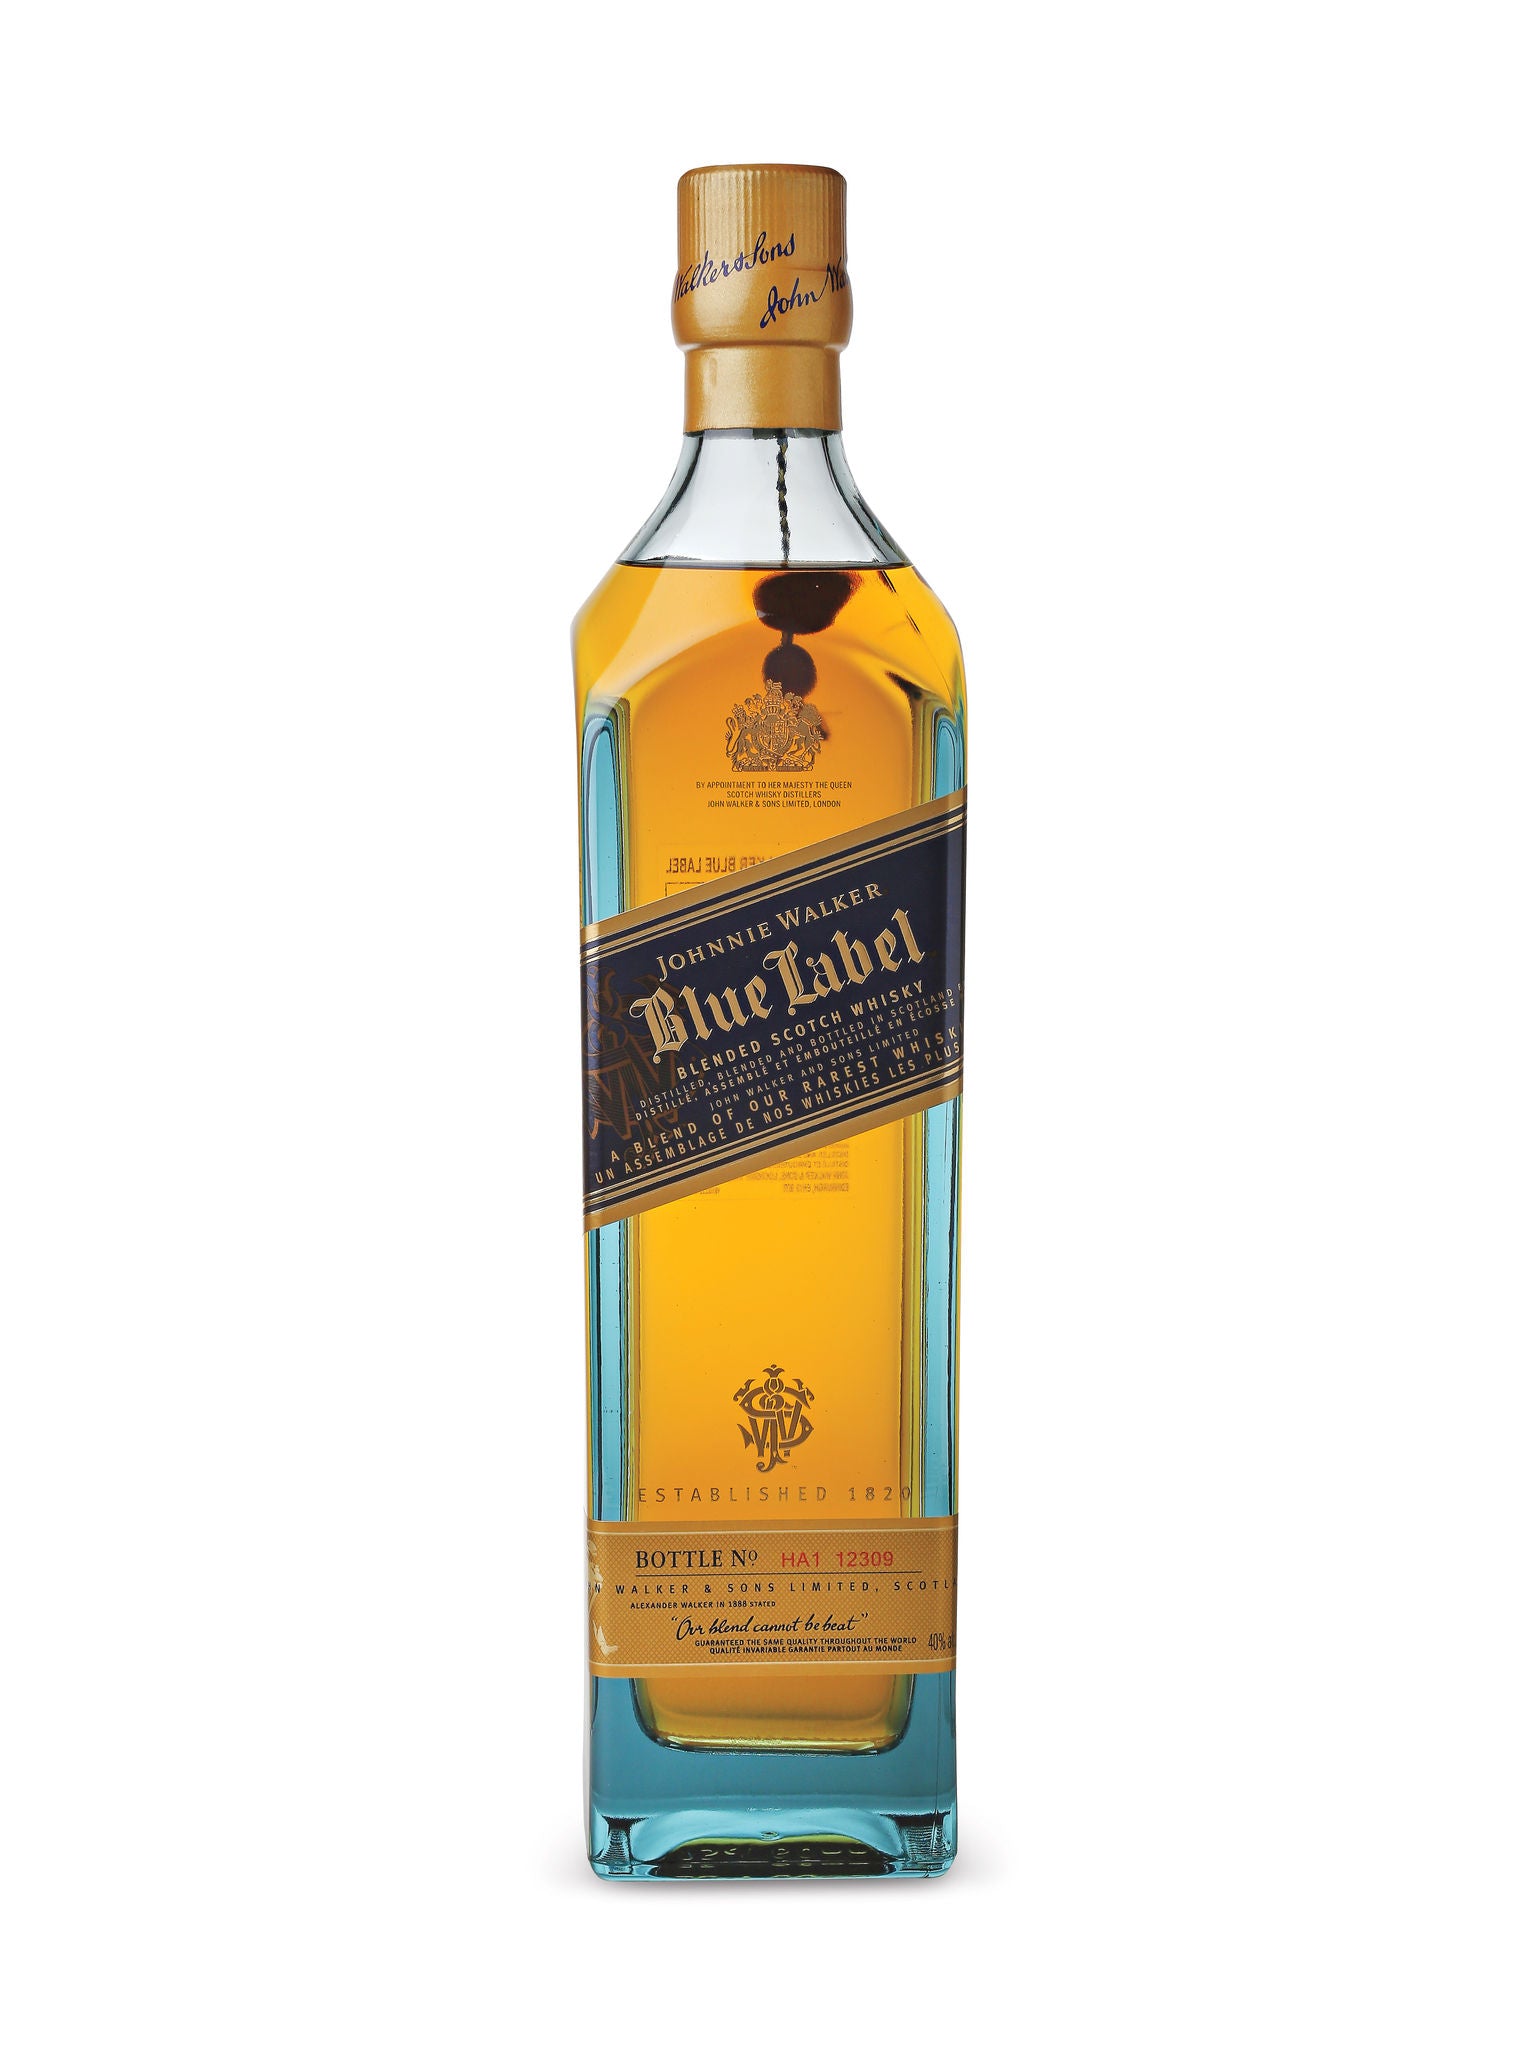 Johnnie Walker Blue Label Scotch Whisky (I acknowledge I am over 19 years of age)